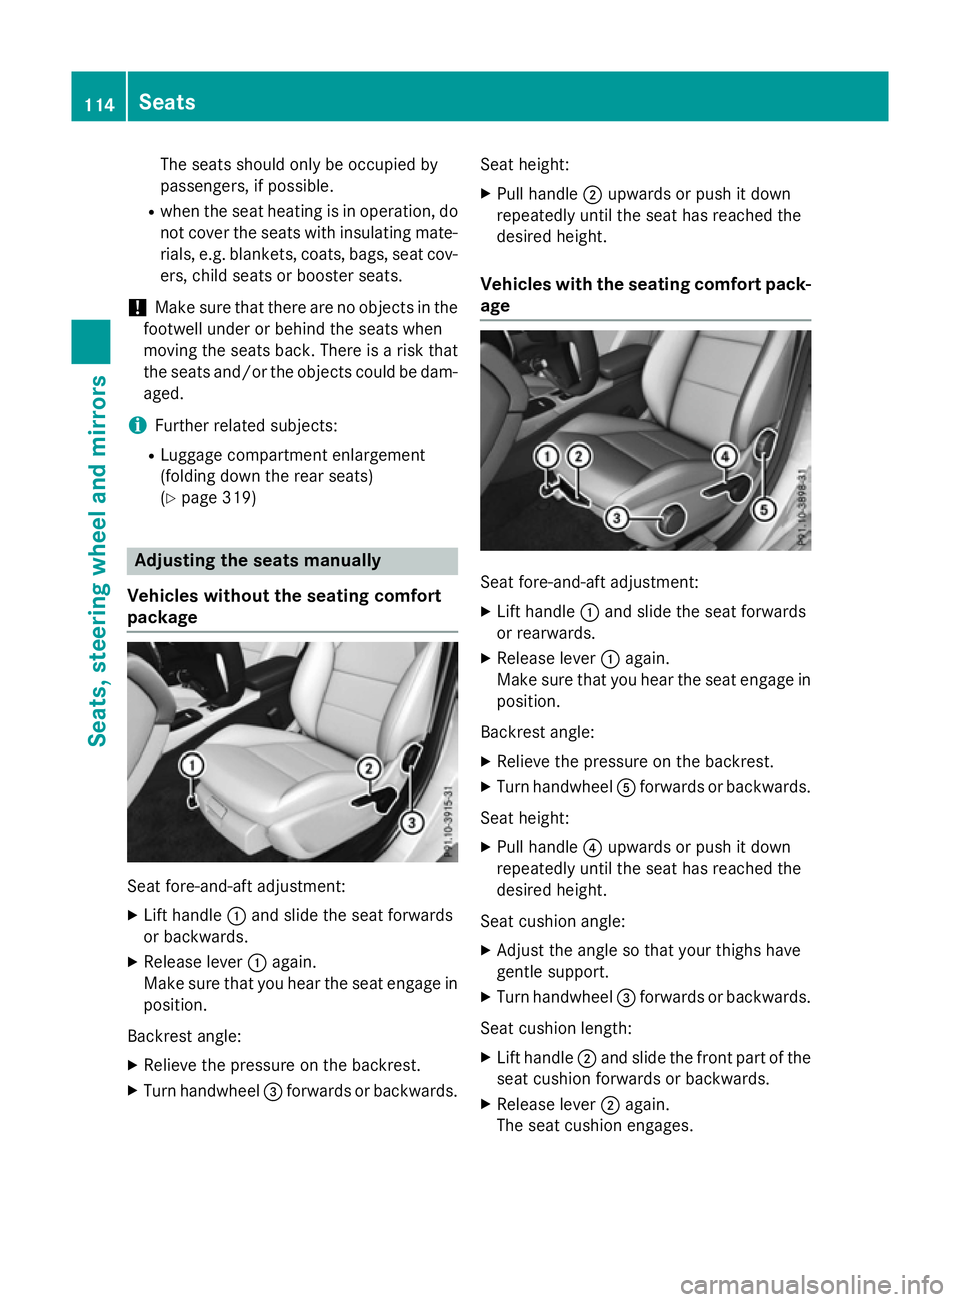 MERCEDES-BENZ CLA SHOOTING BRAKE 2015  Owners Manual The seats should only be occupied by
passengers, if possible.
R when the seat heating is in operation, do
not cover the seats with insulating mate-
rials, e.g. blankets, coats, bags, seat cov- ers, ch